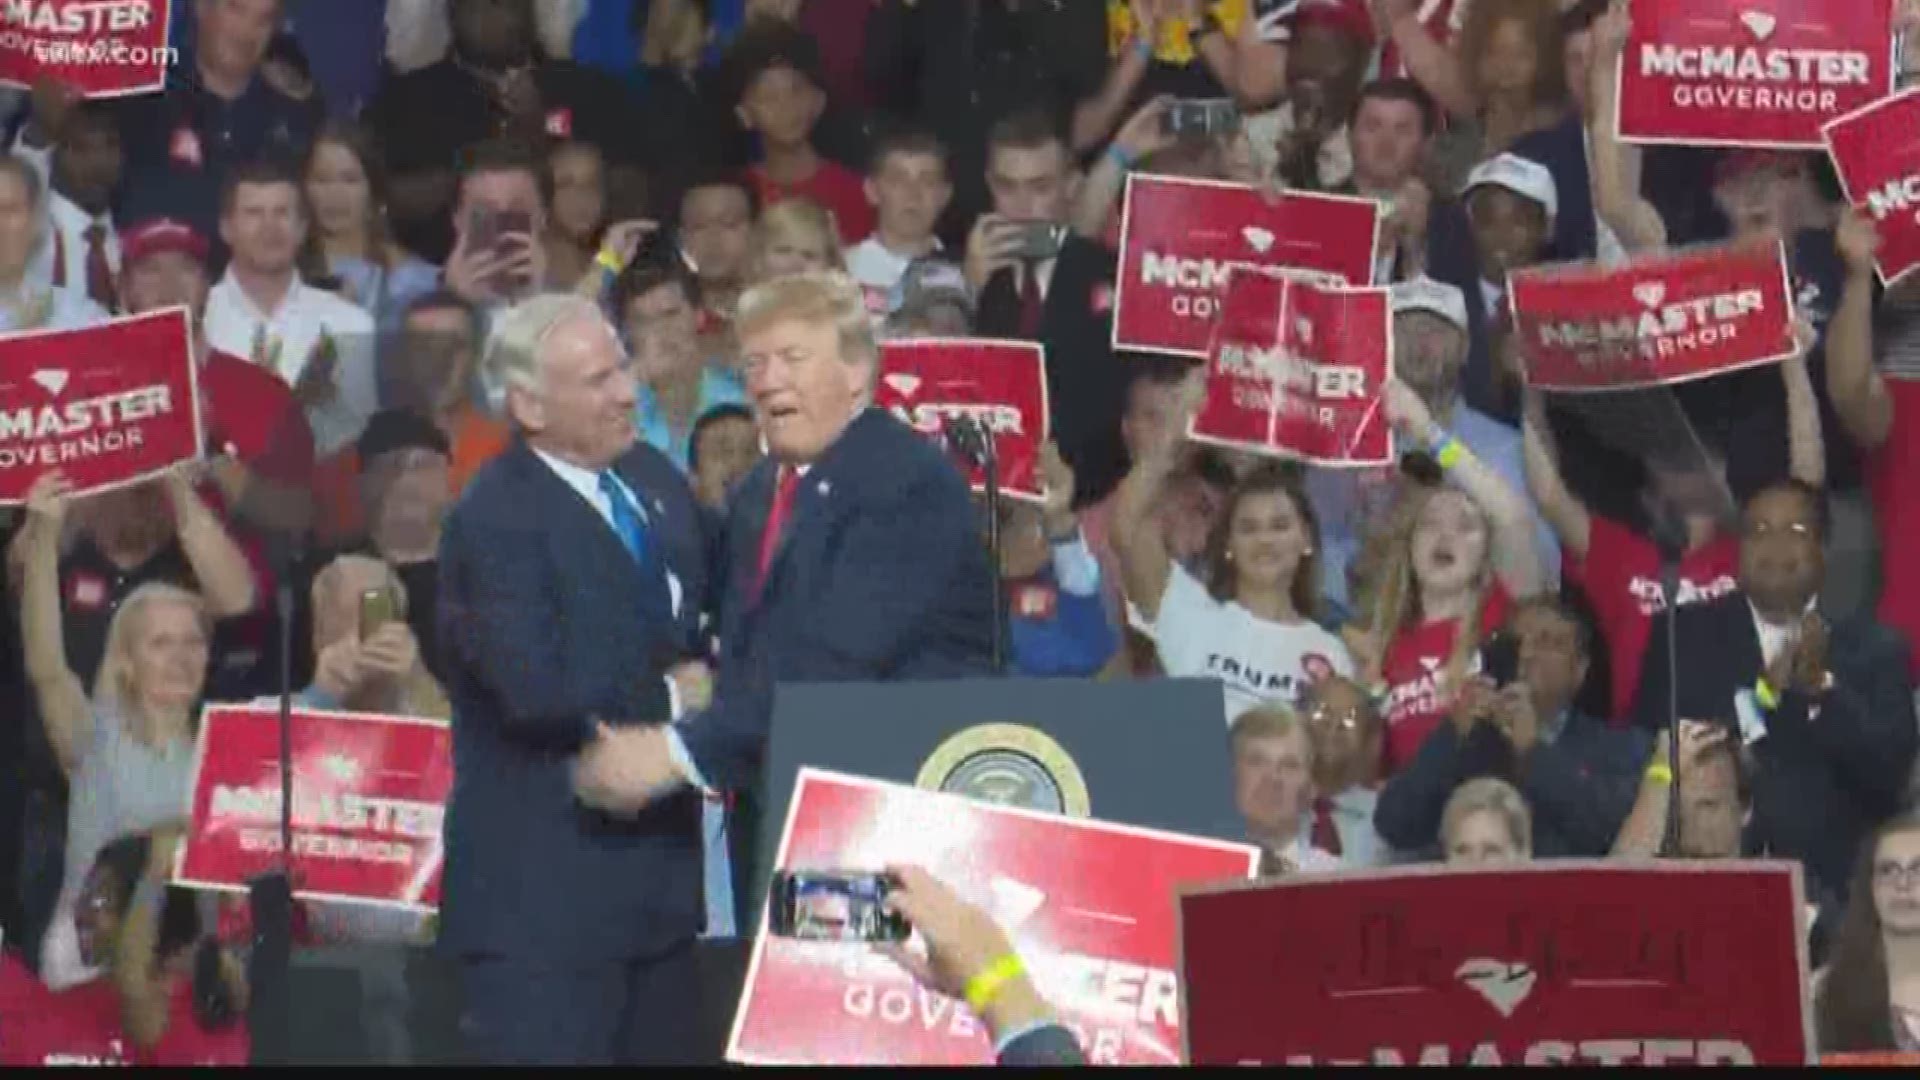 President Trump spoke for about an hour at Airport high school and gave support to Gov. McMaster